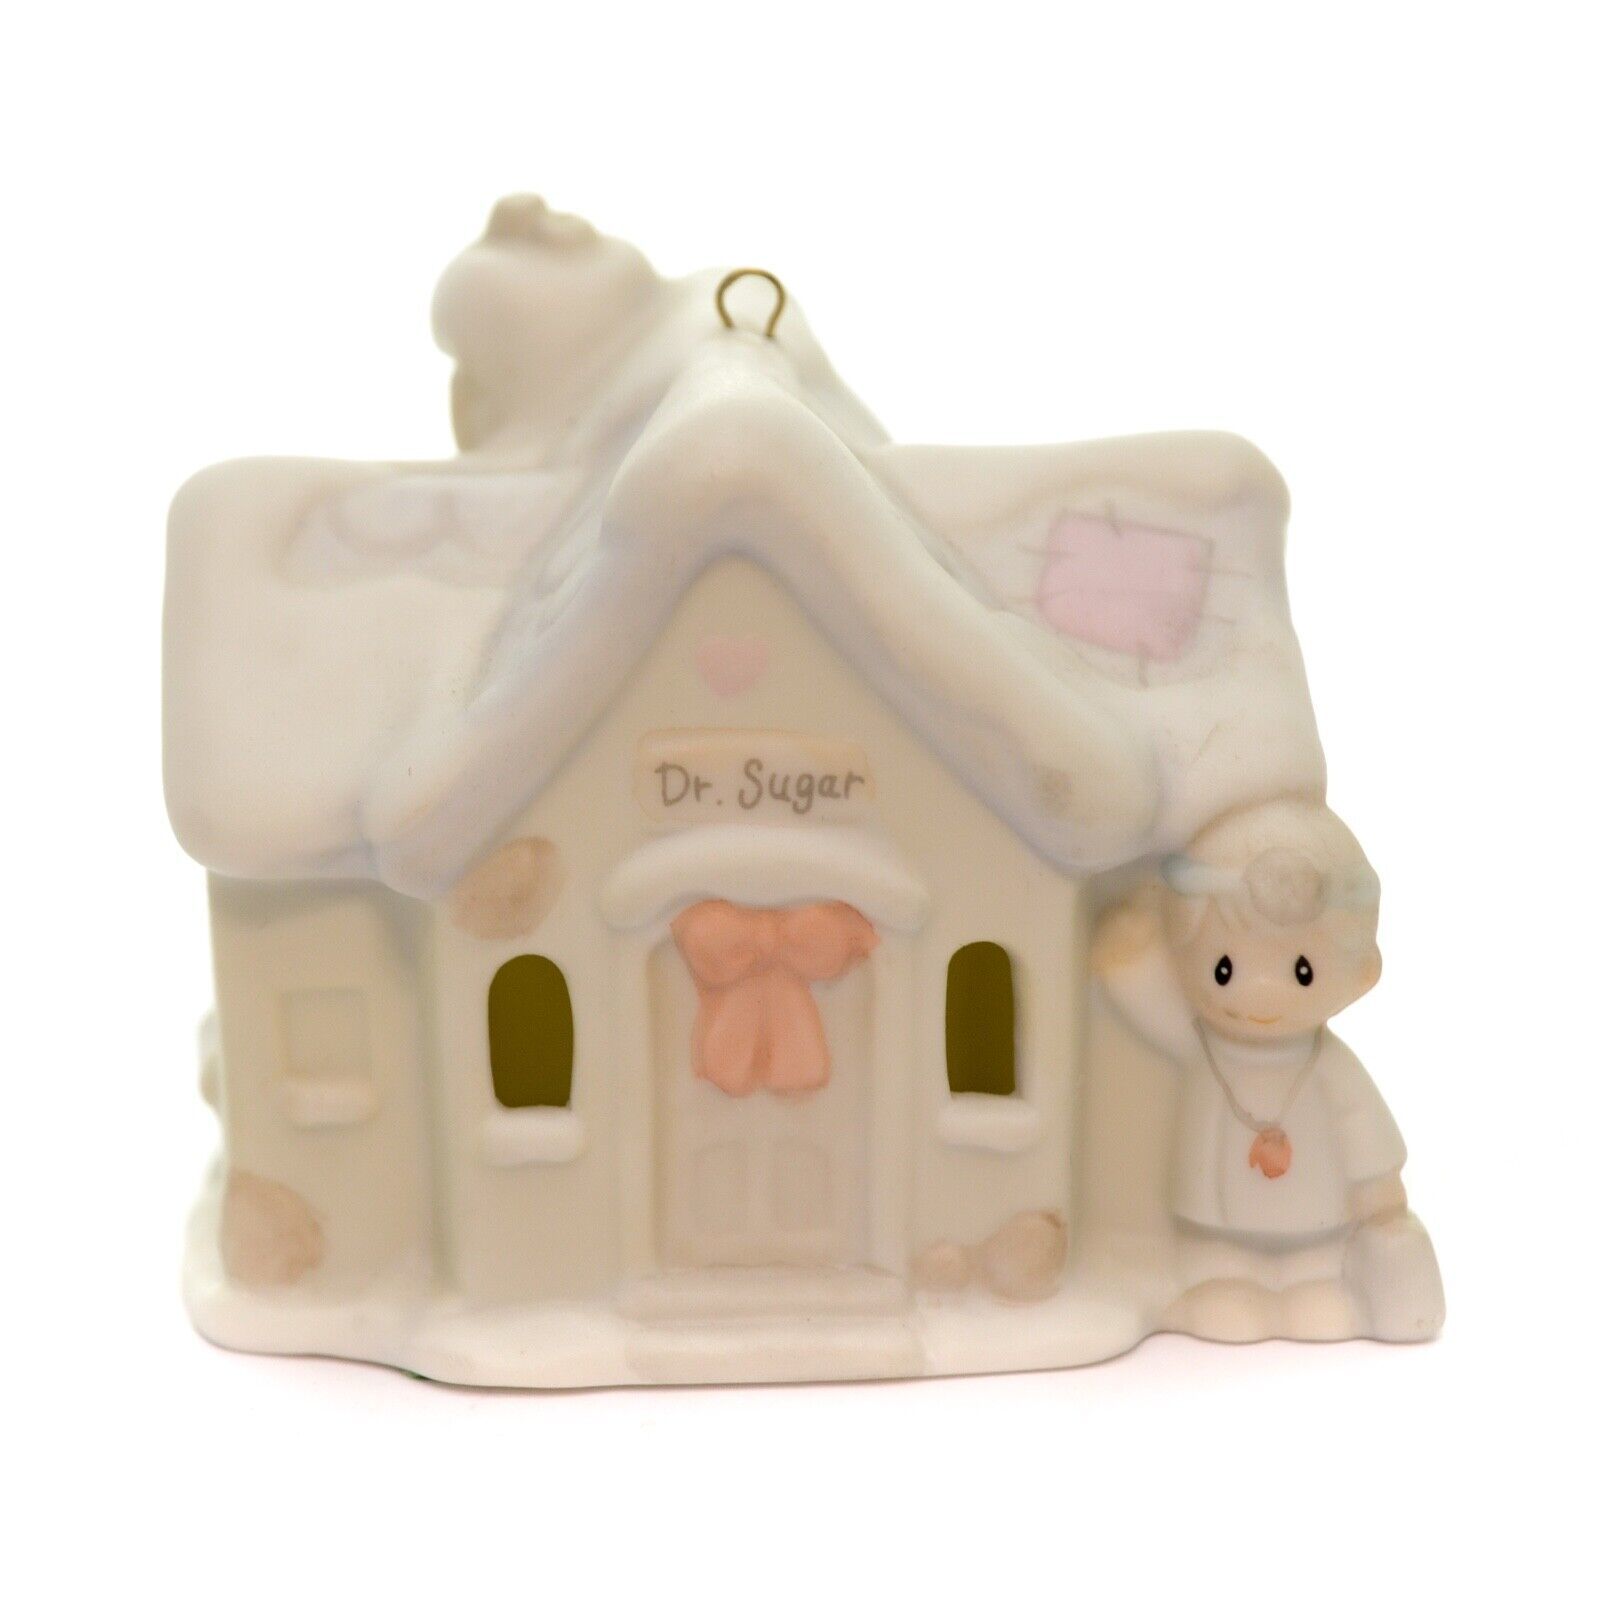 Primary image for Vintage Enesco 1995 White Small Doctor Sugar Porcelain House Hanging 530441